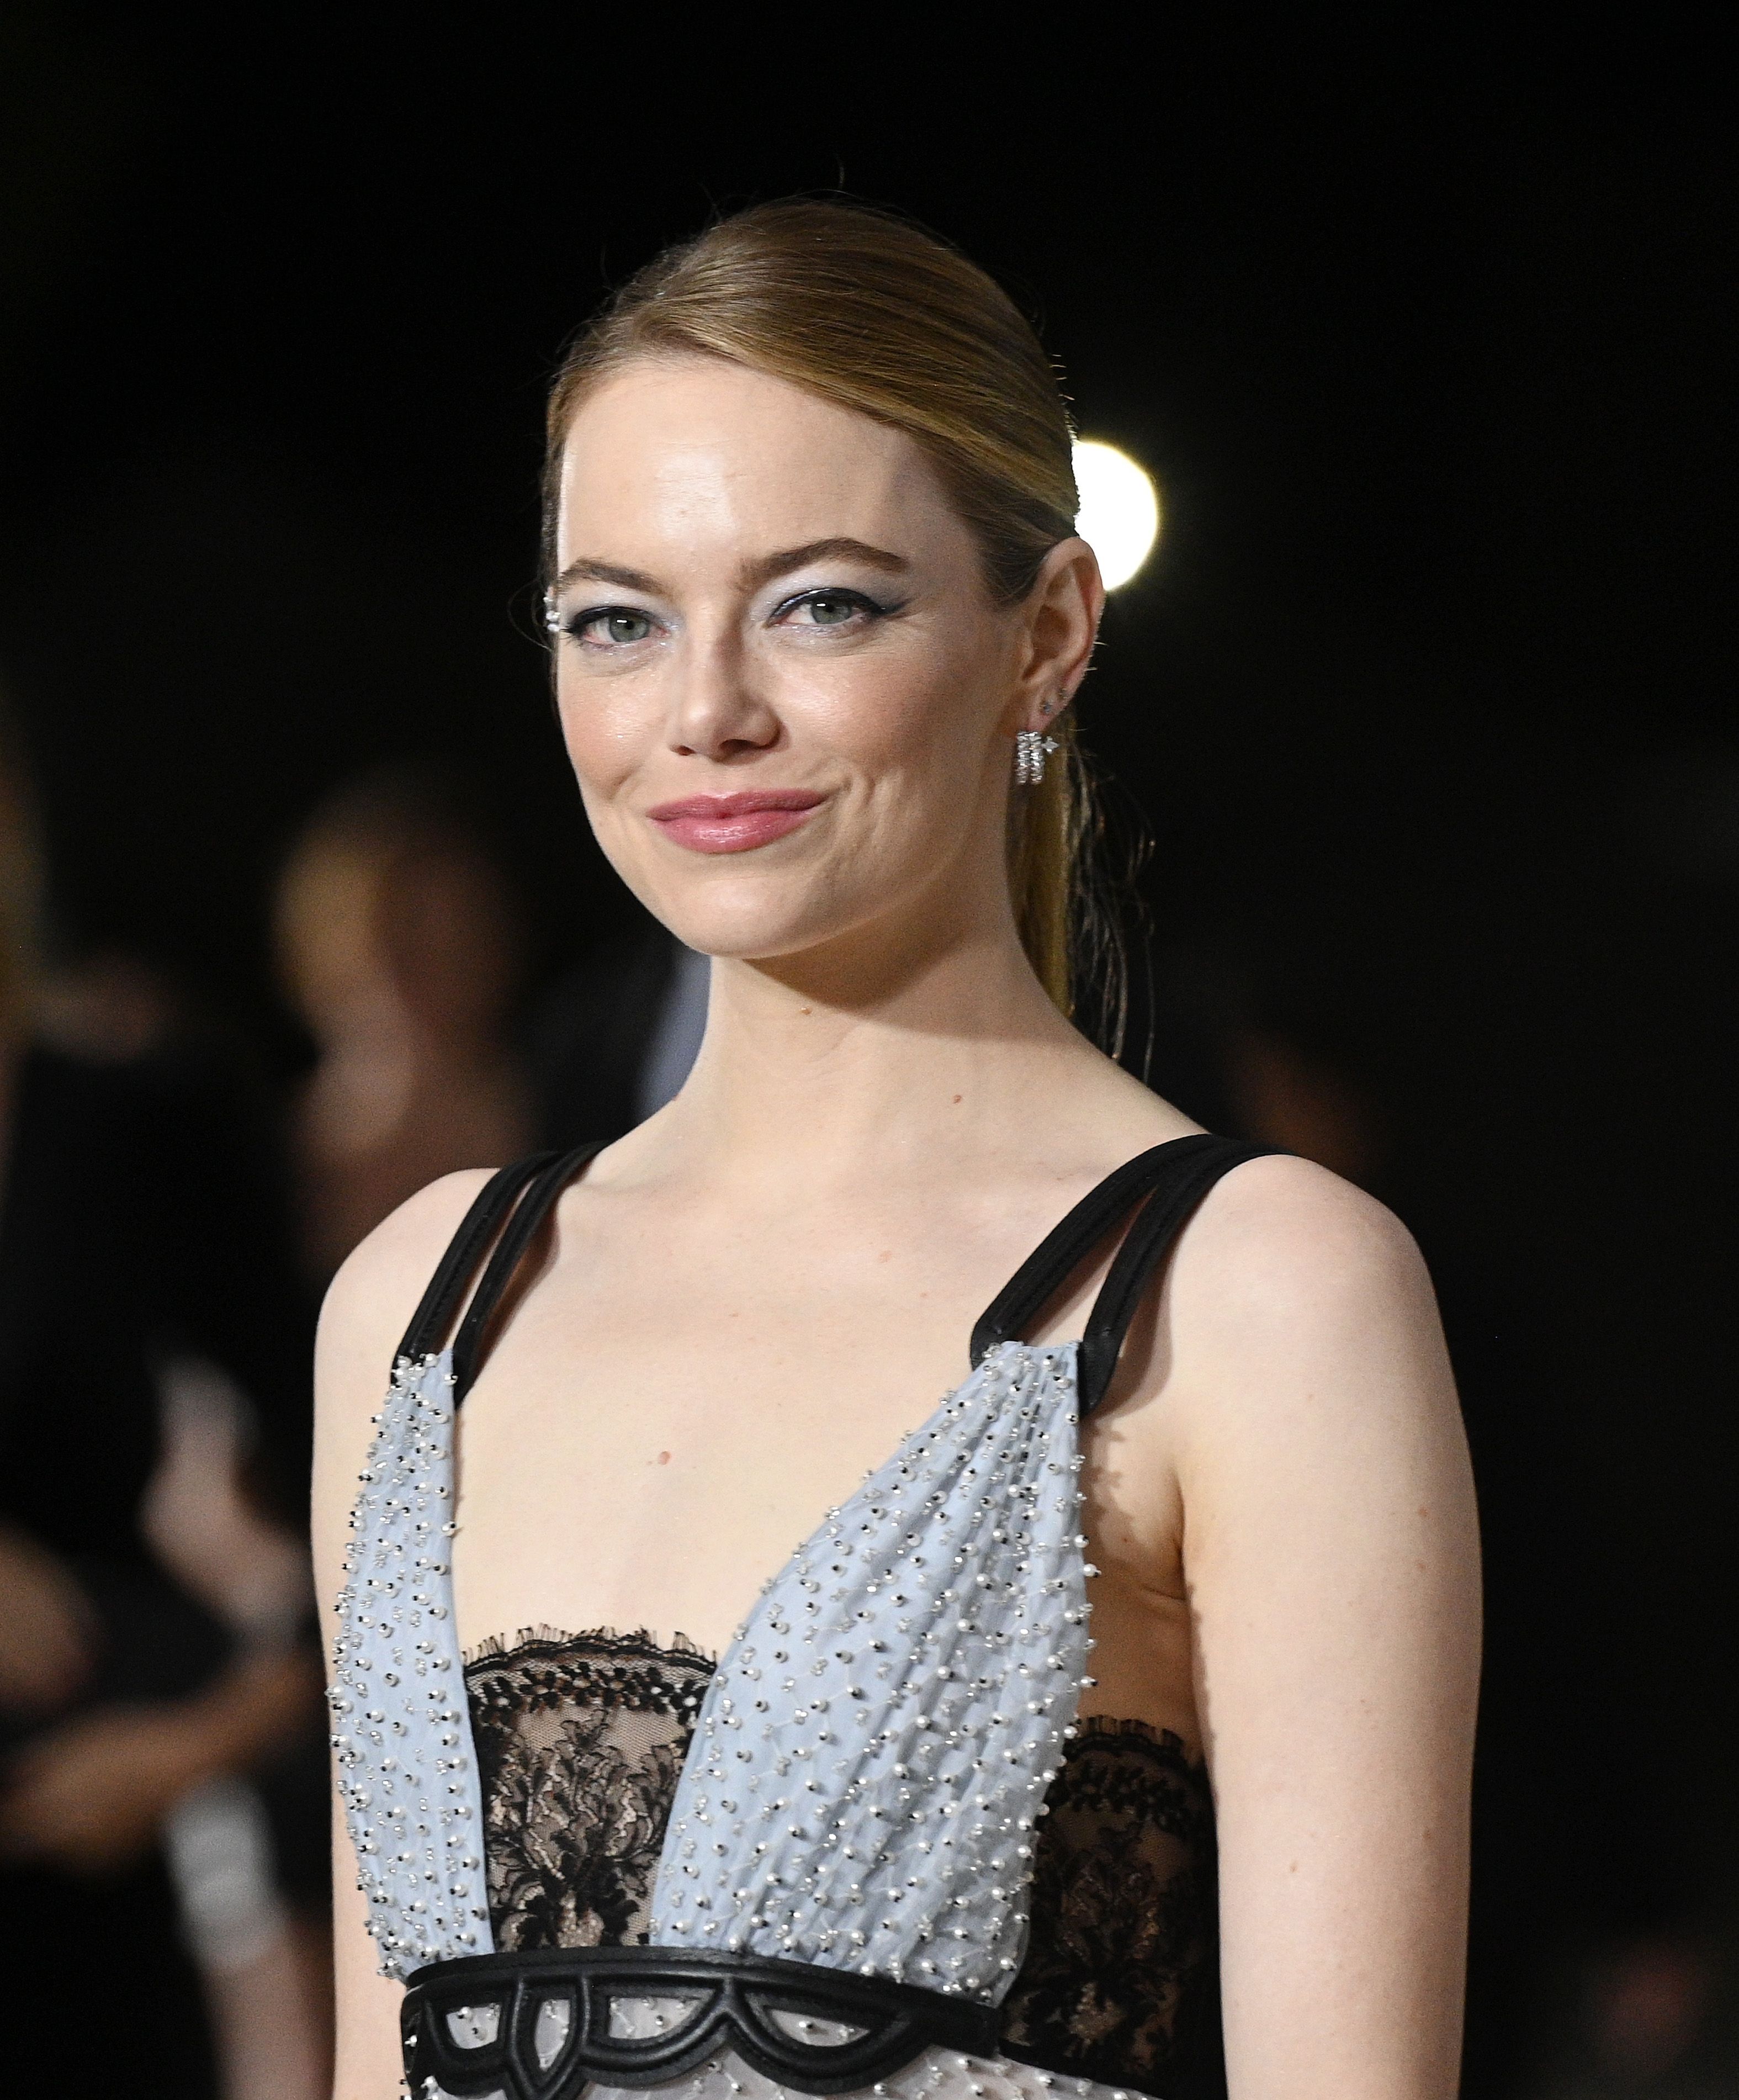 Emma Stone and the California Desert Star in the Actress' First